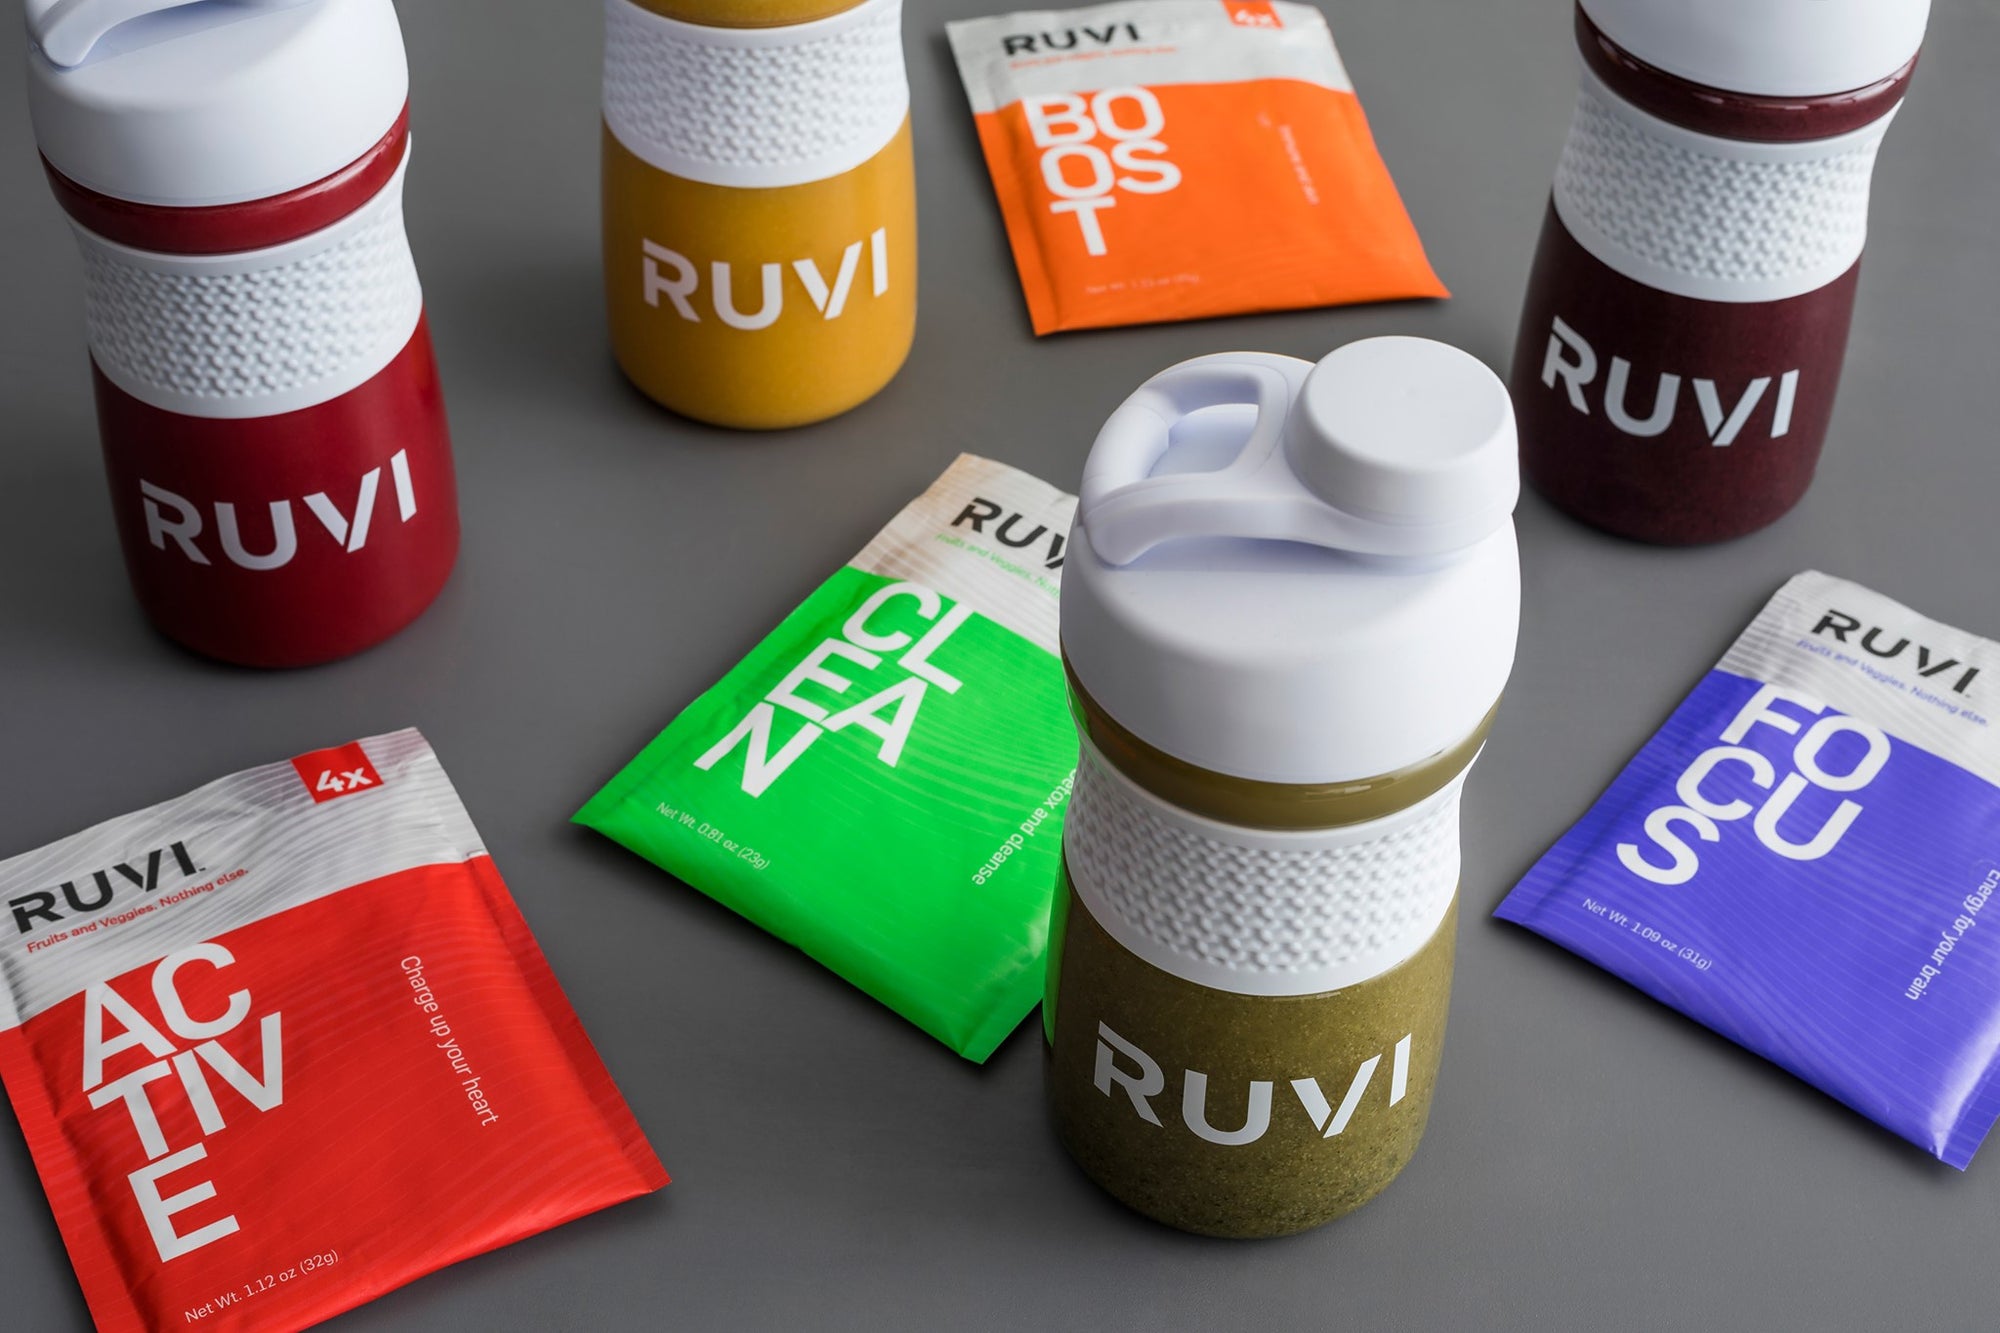 4 Ruvi blend flavors Active, Boost, Clean, Focus in shaker bottles with packages surrounding